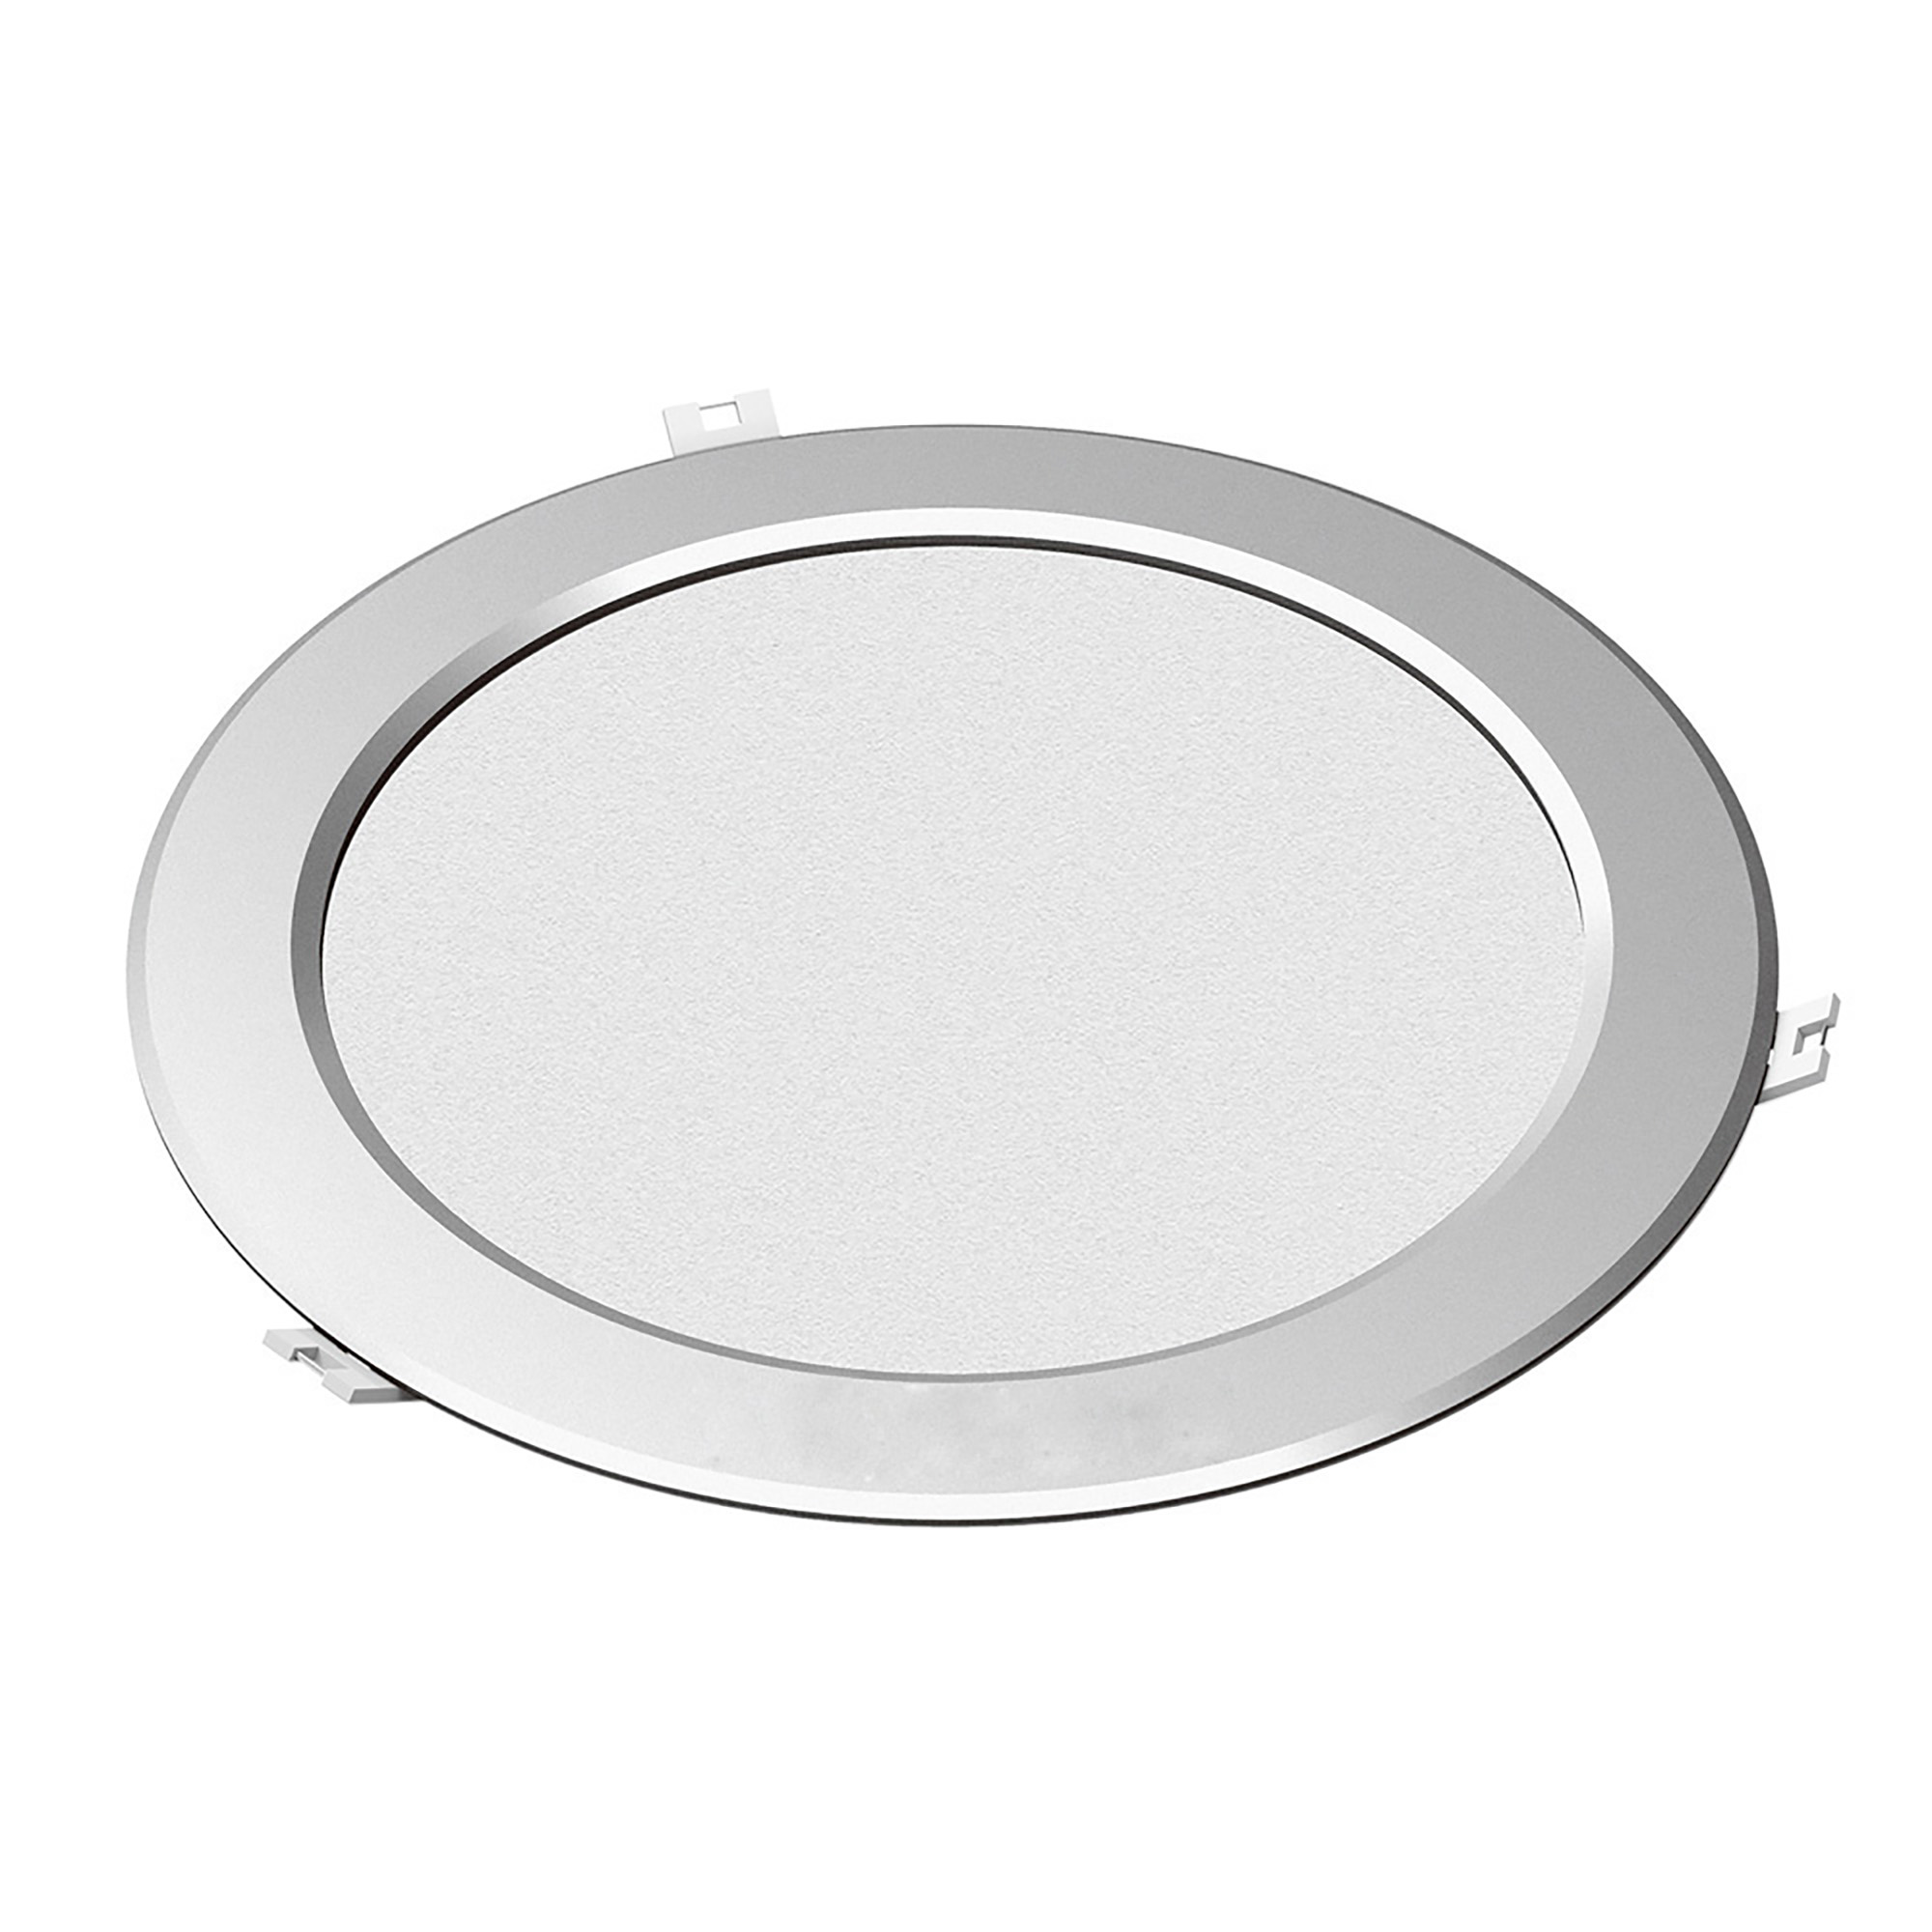 204052  Intego Round Classic 8 Inch 16W 4000K IP42 Cut-Out 210mm